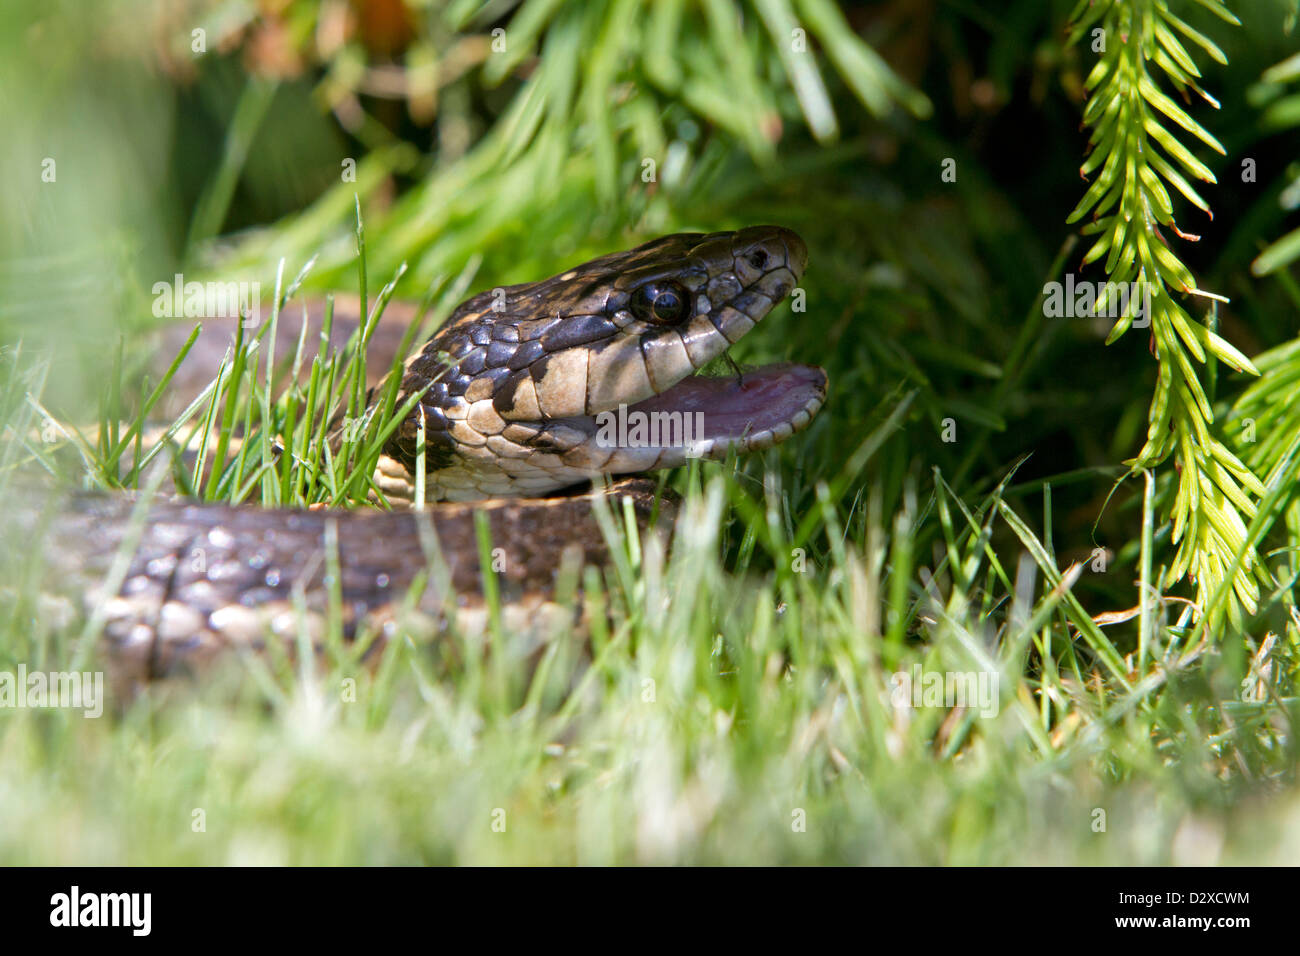 Common Garter Snake (Thamnophis sirtalis) close-up with mouth open in garden in Nanaimo, Vancouver Island, BC, Canada in June Stock Photo